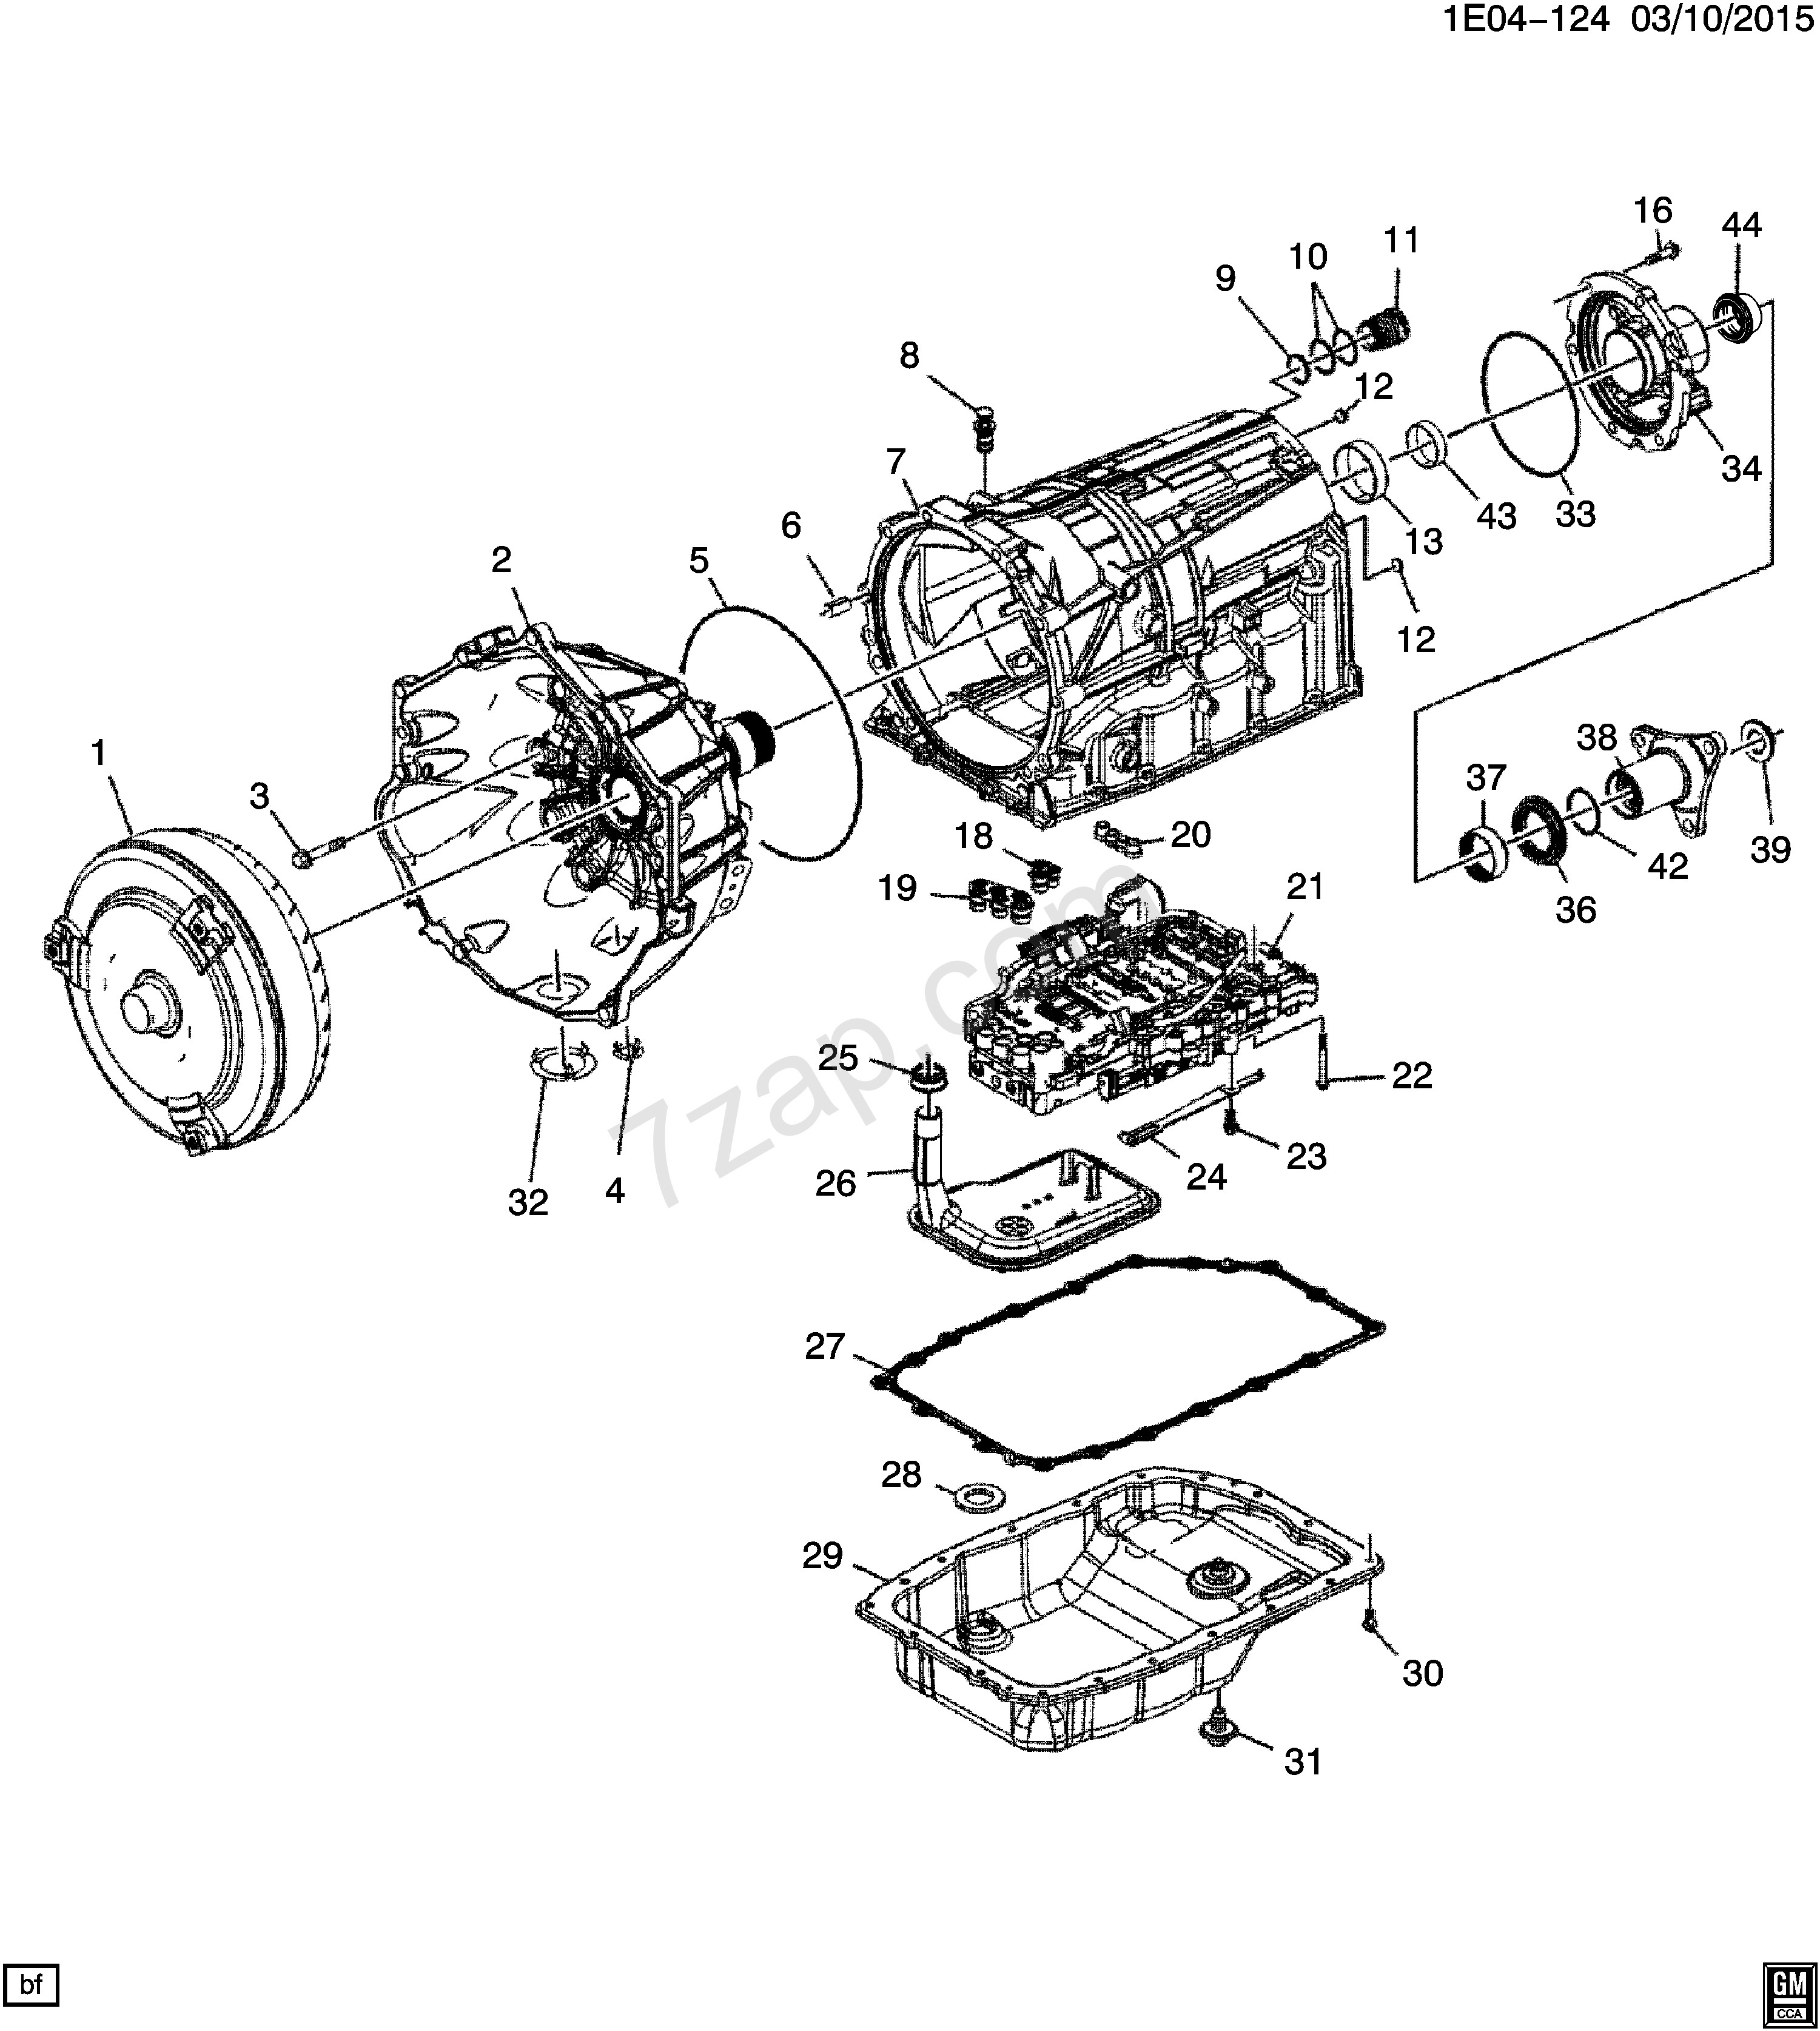 Diagram Of Car Parts In Spanish 2014 2017 Ek19 Automatic Transmission Myc 6l80 Case & Related Of Diagram Of Car Parts In Spanish